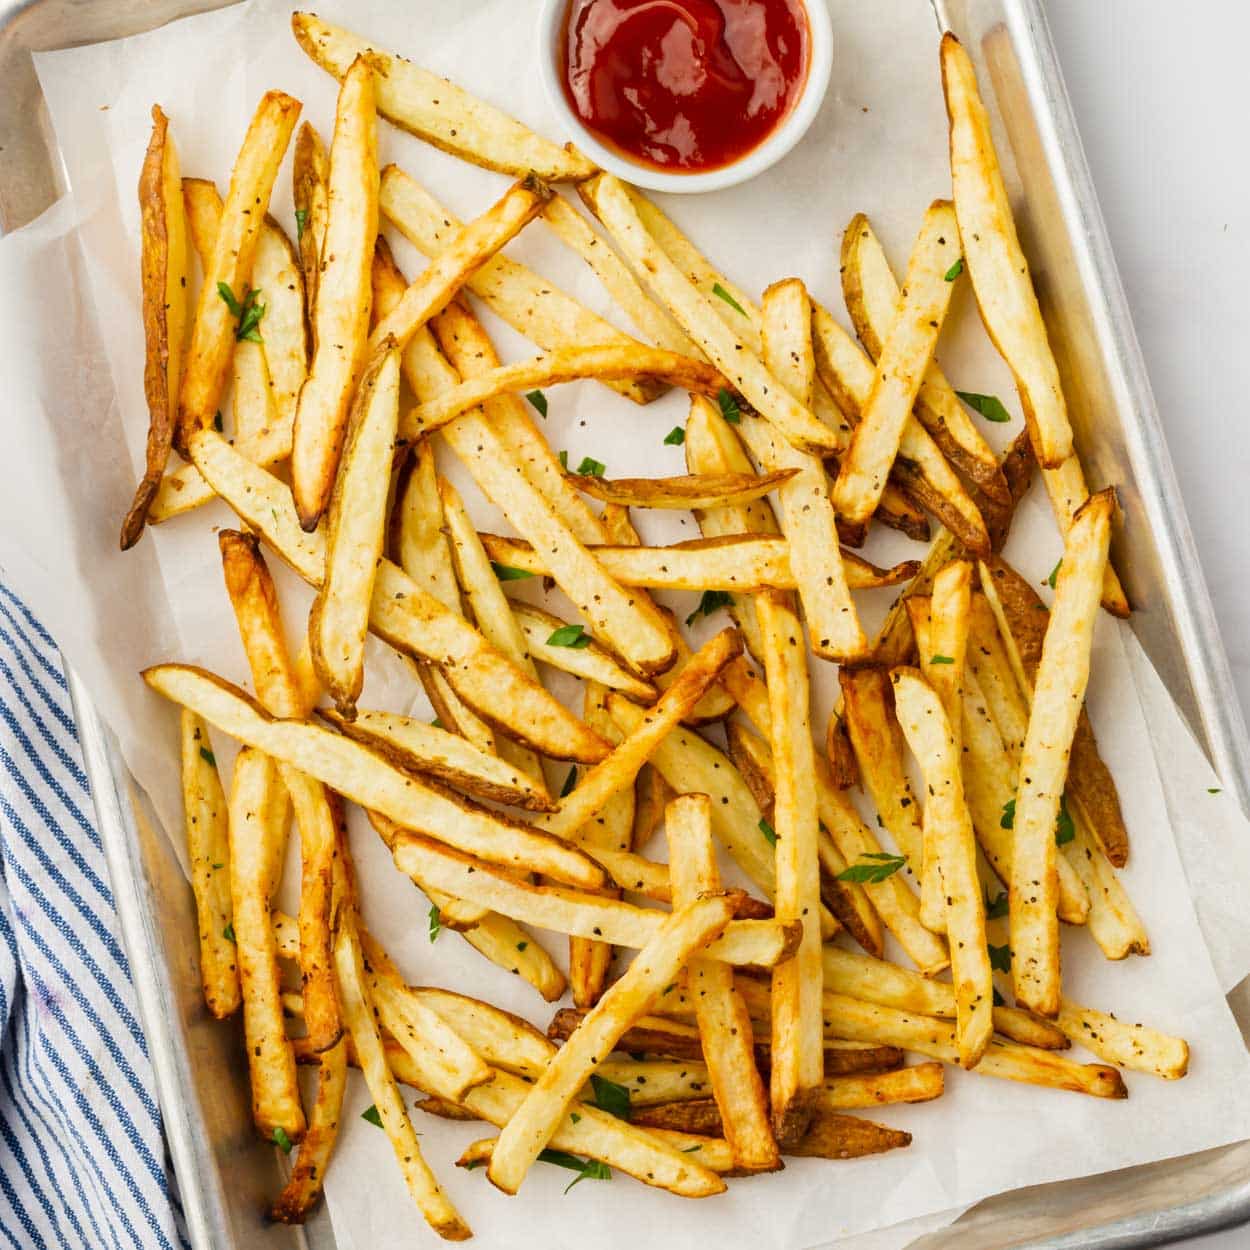 a small sheet pan lined with parchment paper, holding freshly cooked french fries and a small bowl of ketchup.